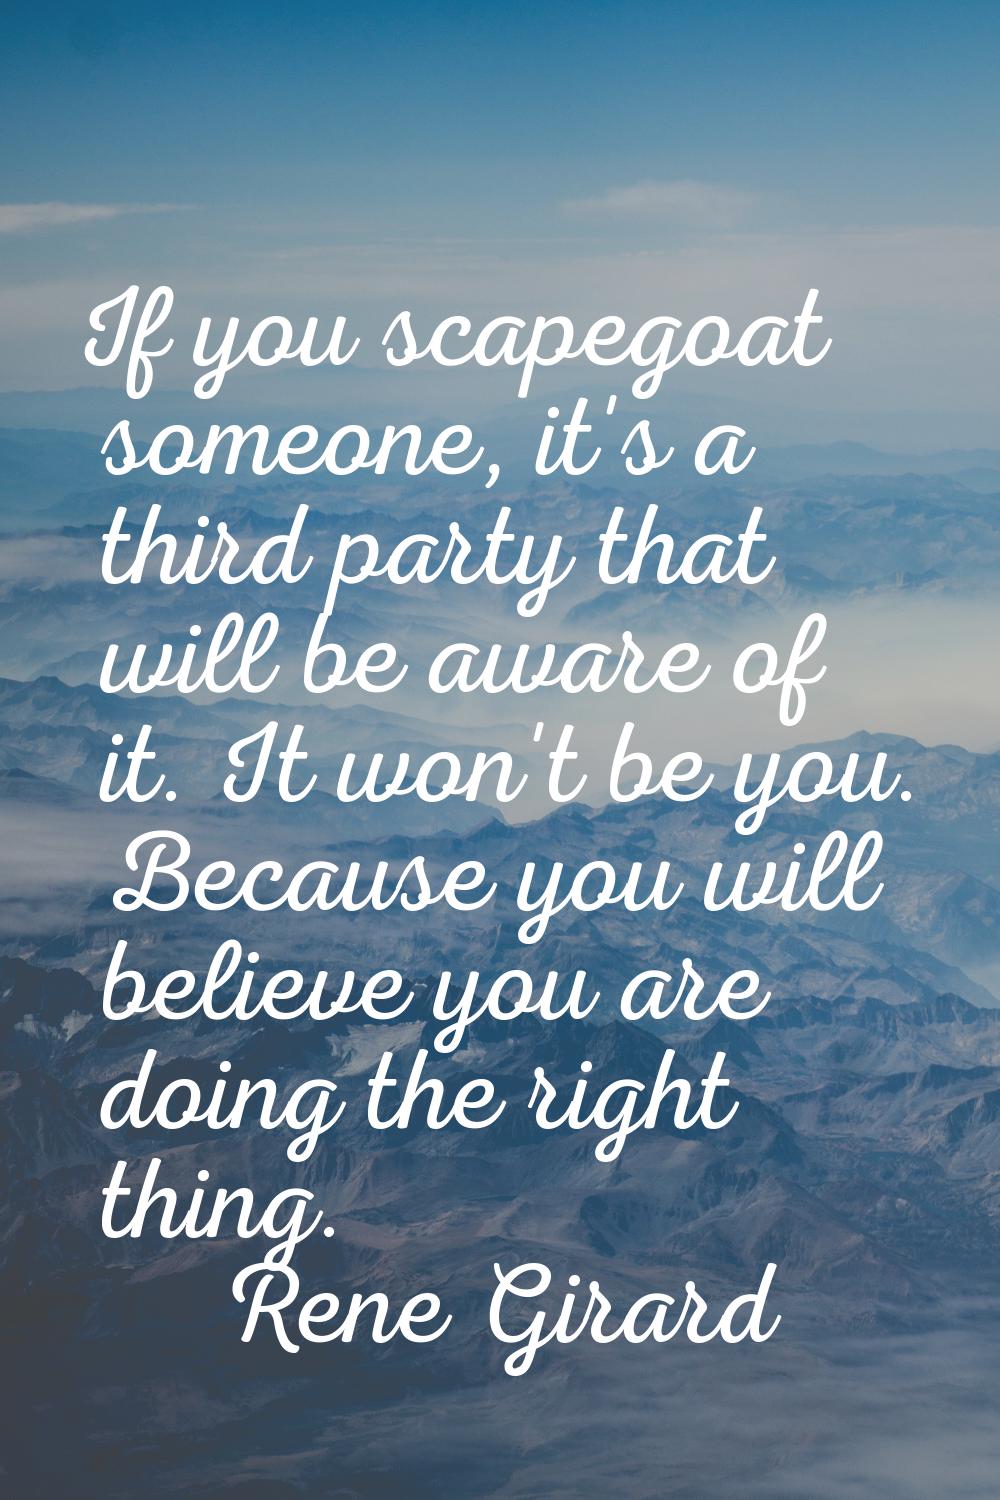 If you scapegoat someone, it's a third party that will be aware of it. It won't be you. Because you